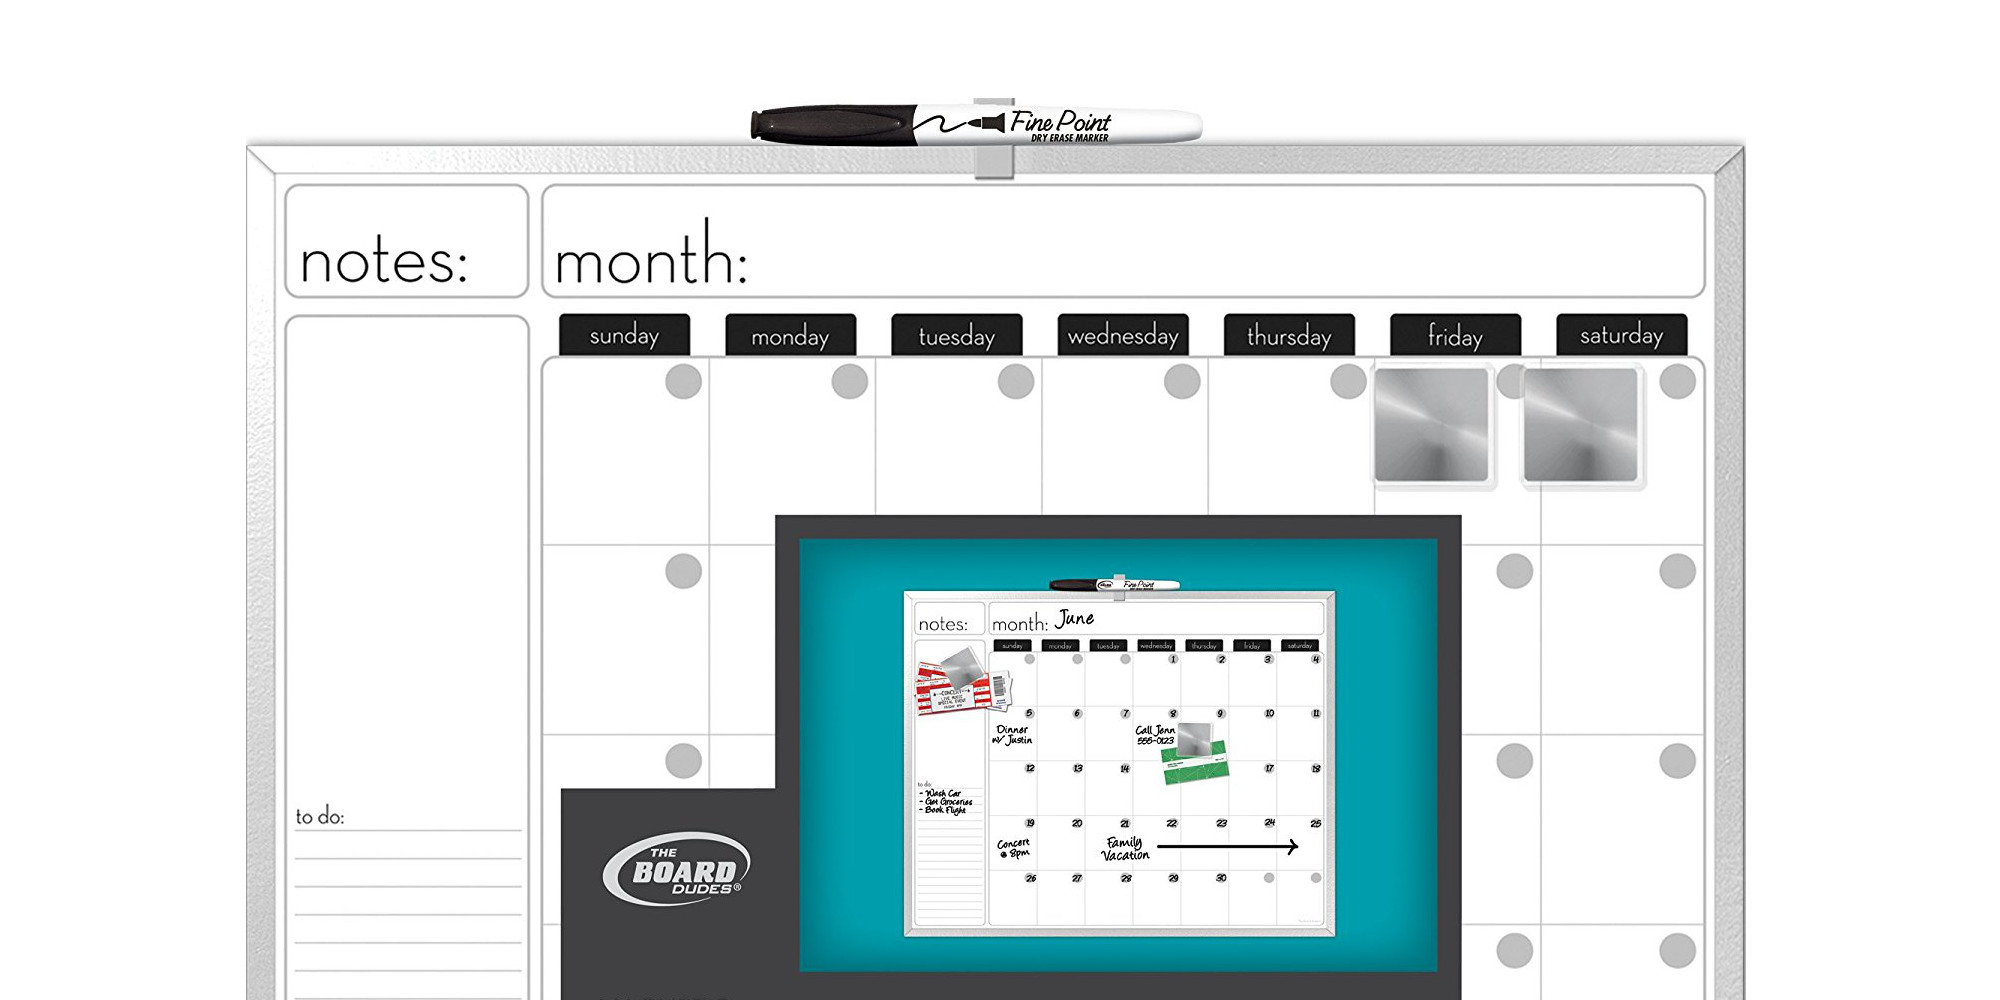 Grab a DryErase Calendar + Marker for just 5.50 Prime shipped